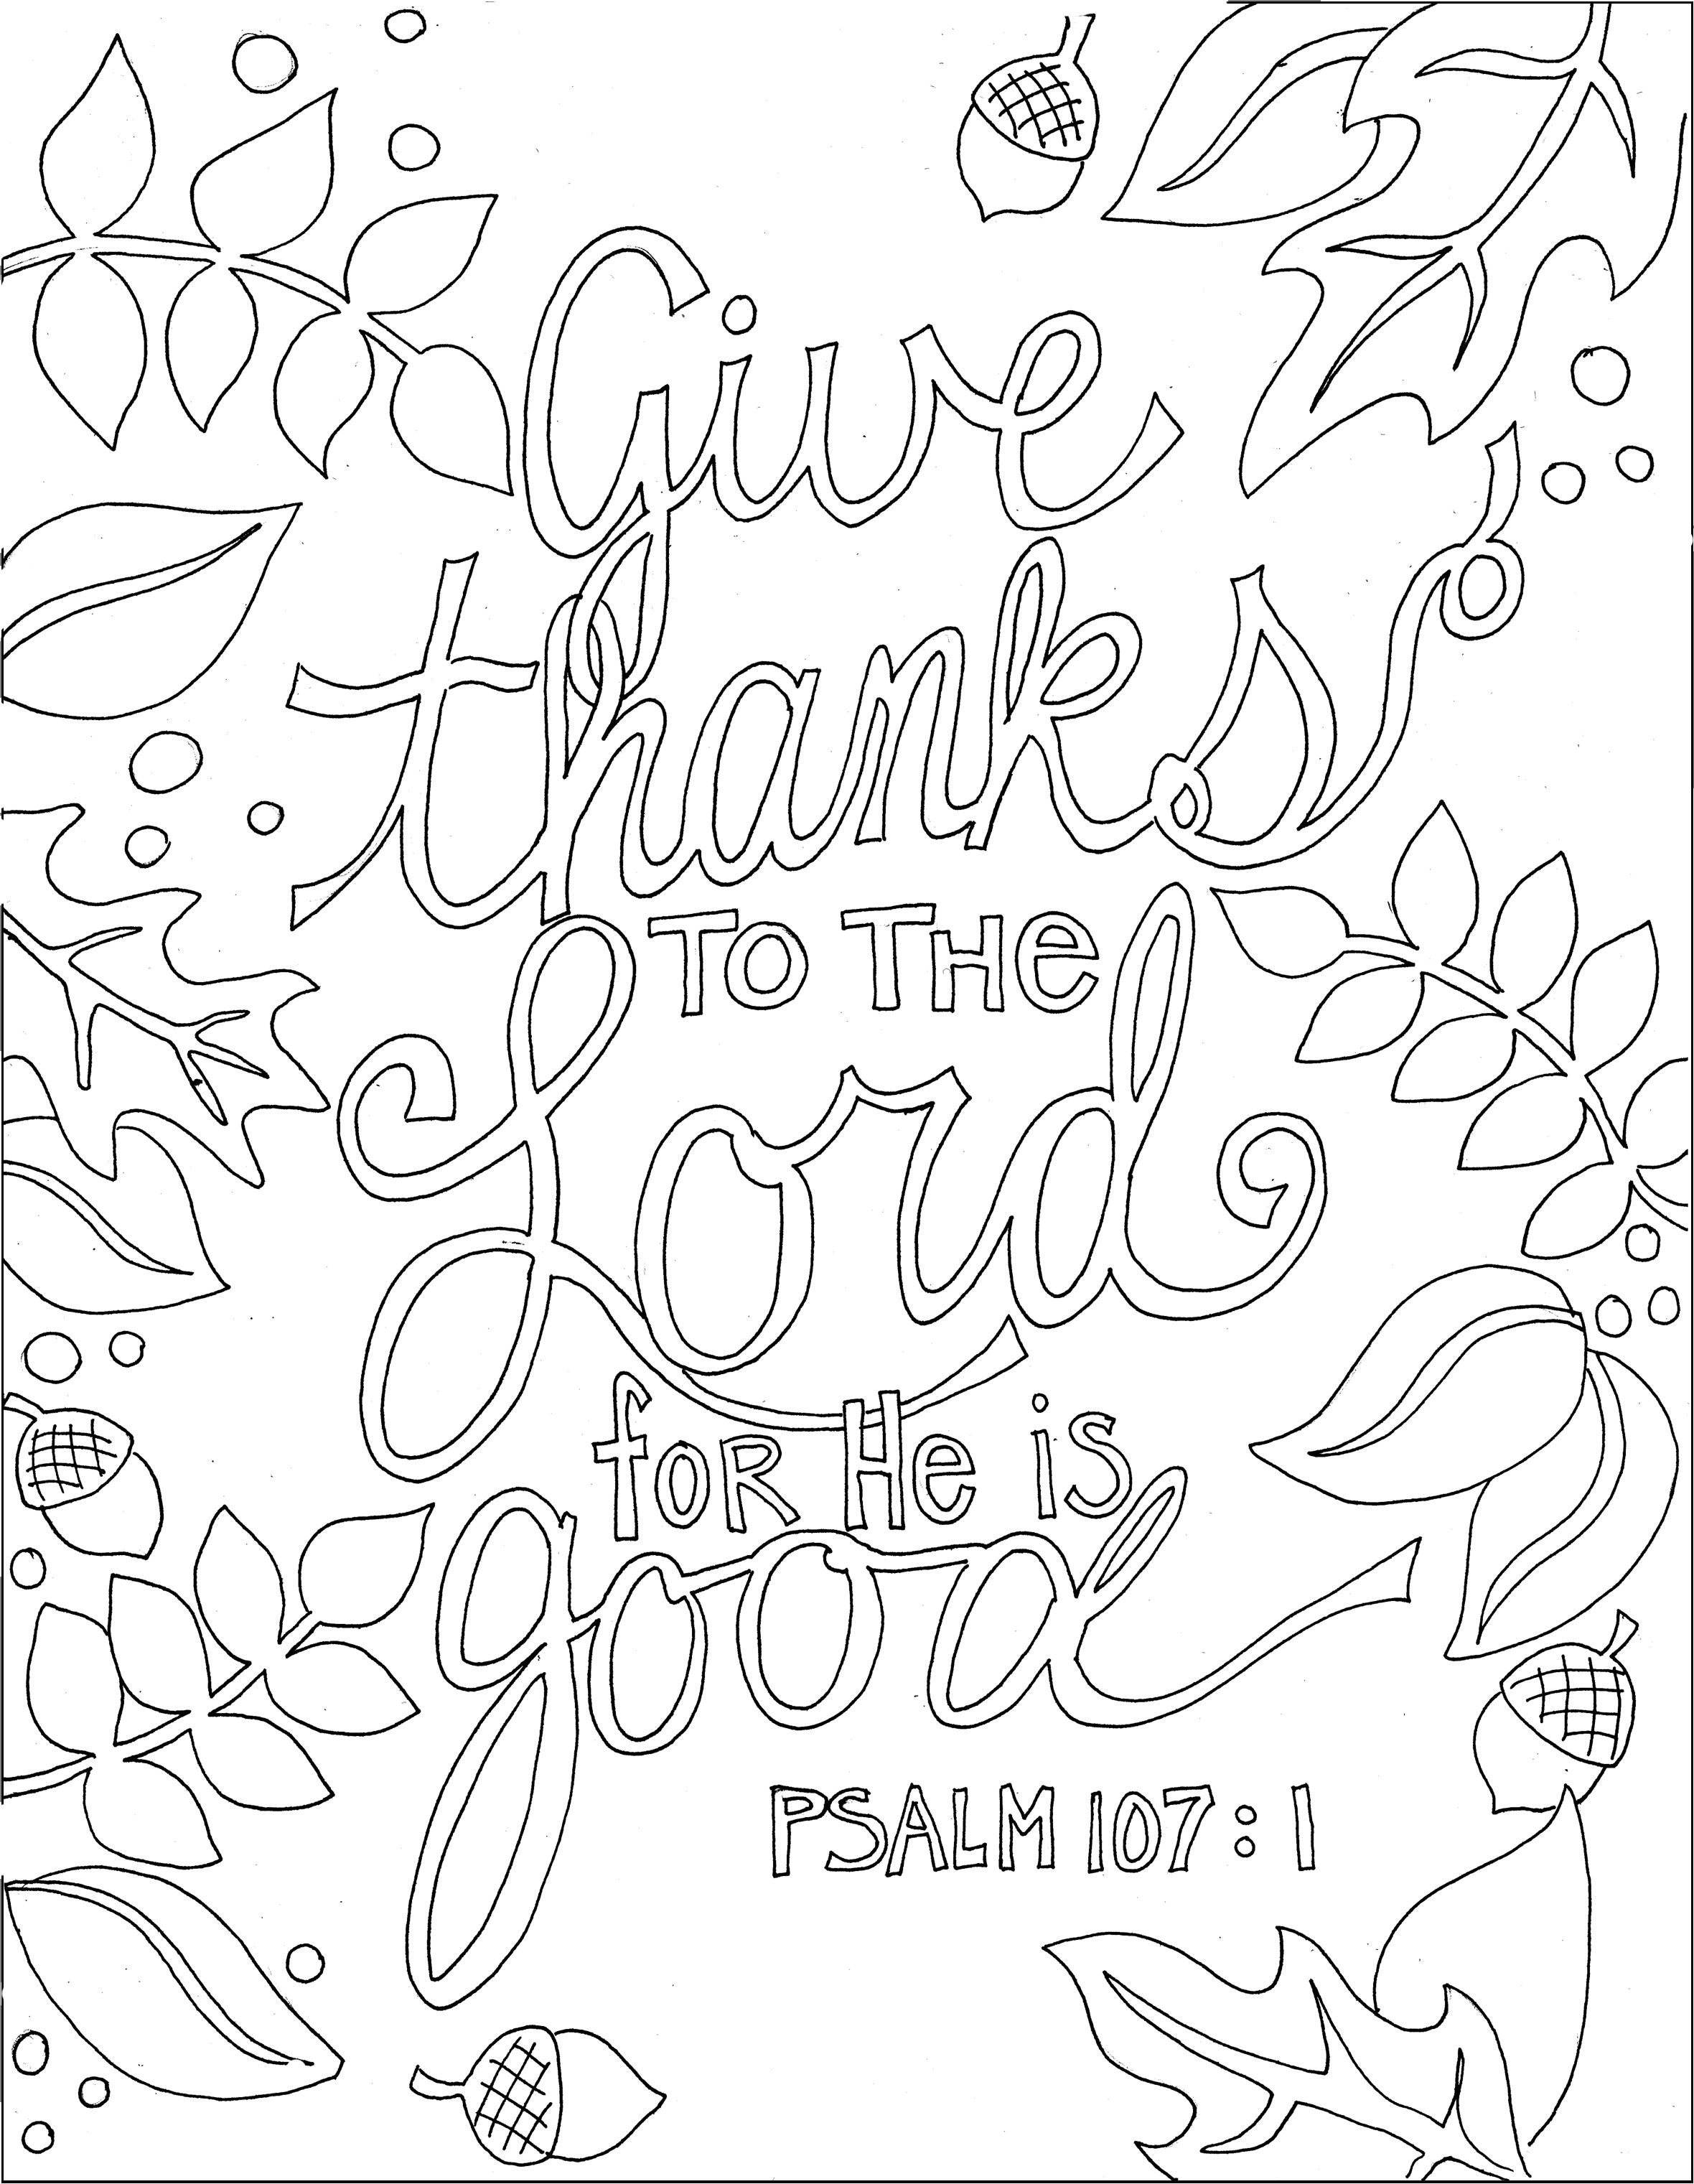 Free Christian Adult Coloring Pages
 50 Adult Bible Coloring Pages 17 Best Ideas About